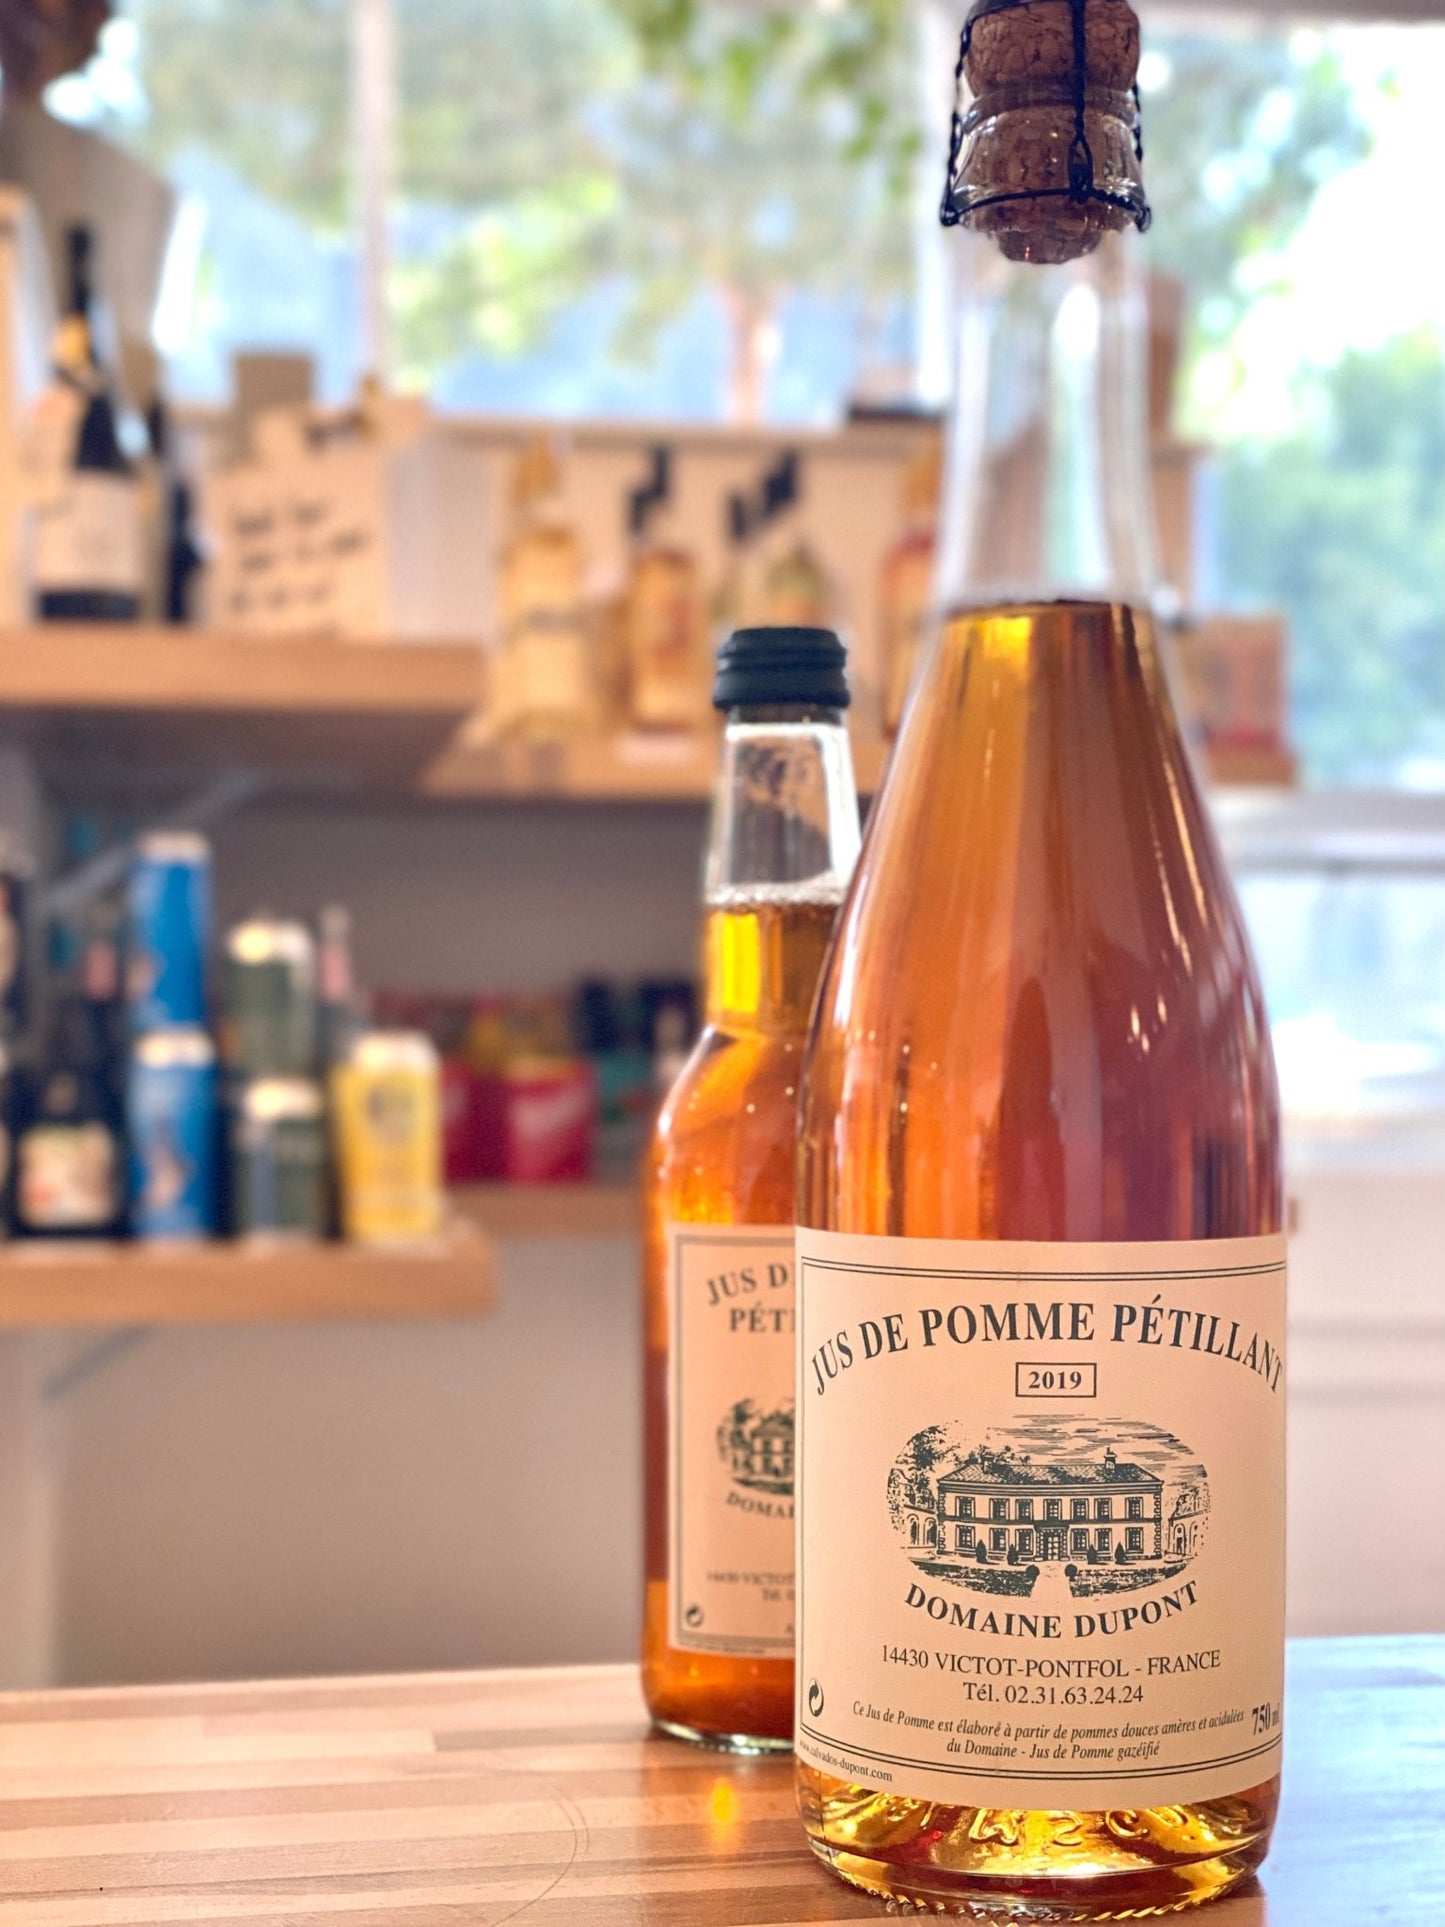 Load image into Gallery viewer, E. Dupont Jus de Pomme Petillant (Sparkling N/A Cider), Normandy, France - DECANTsf
